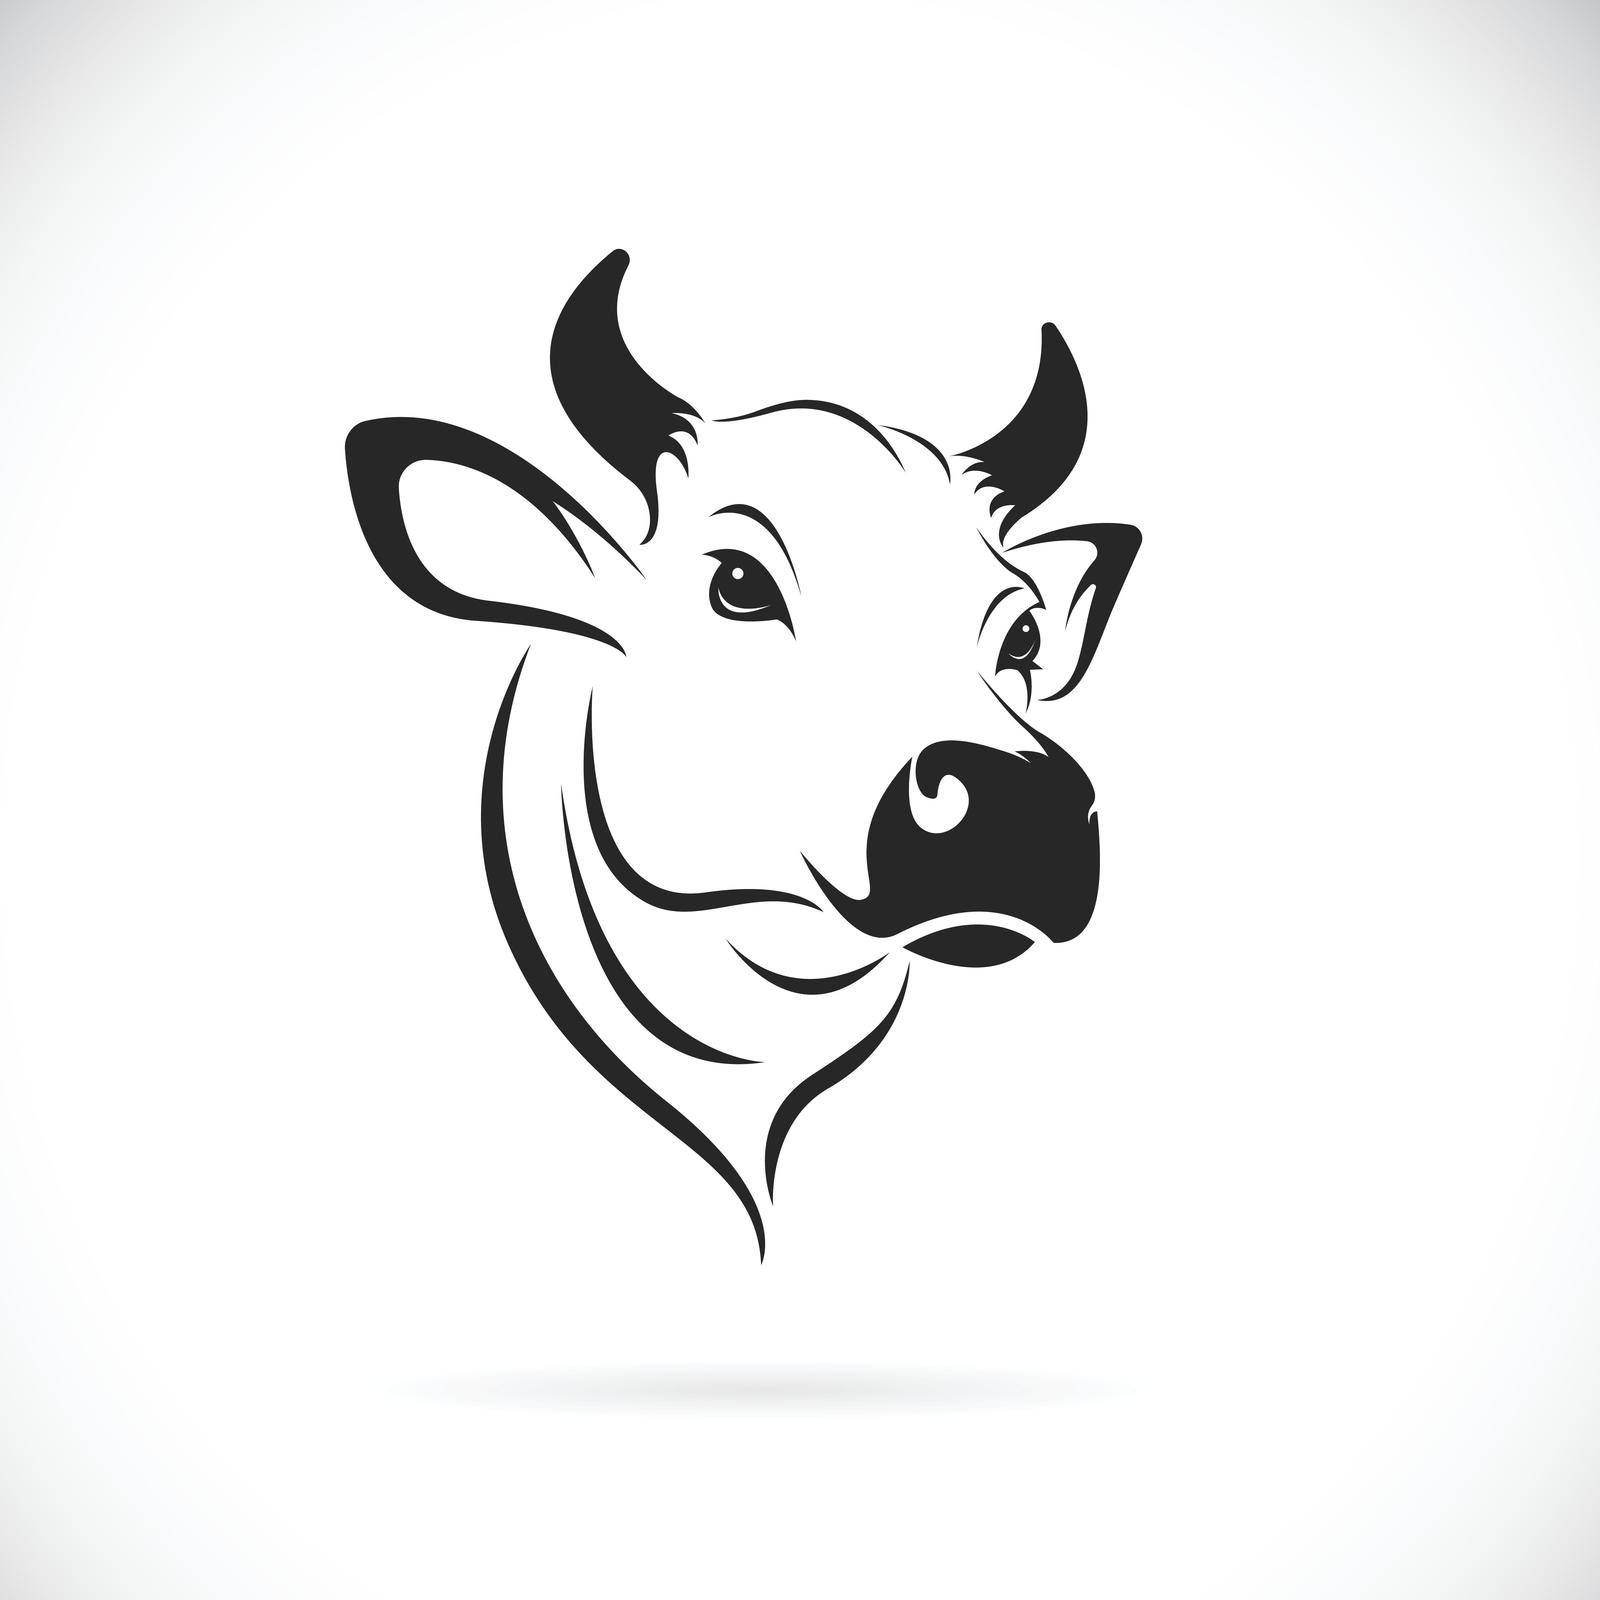 Vector of cow head design on white background. Easy editable layered vector illustration. Farm Animals. by yod67